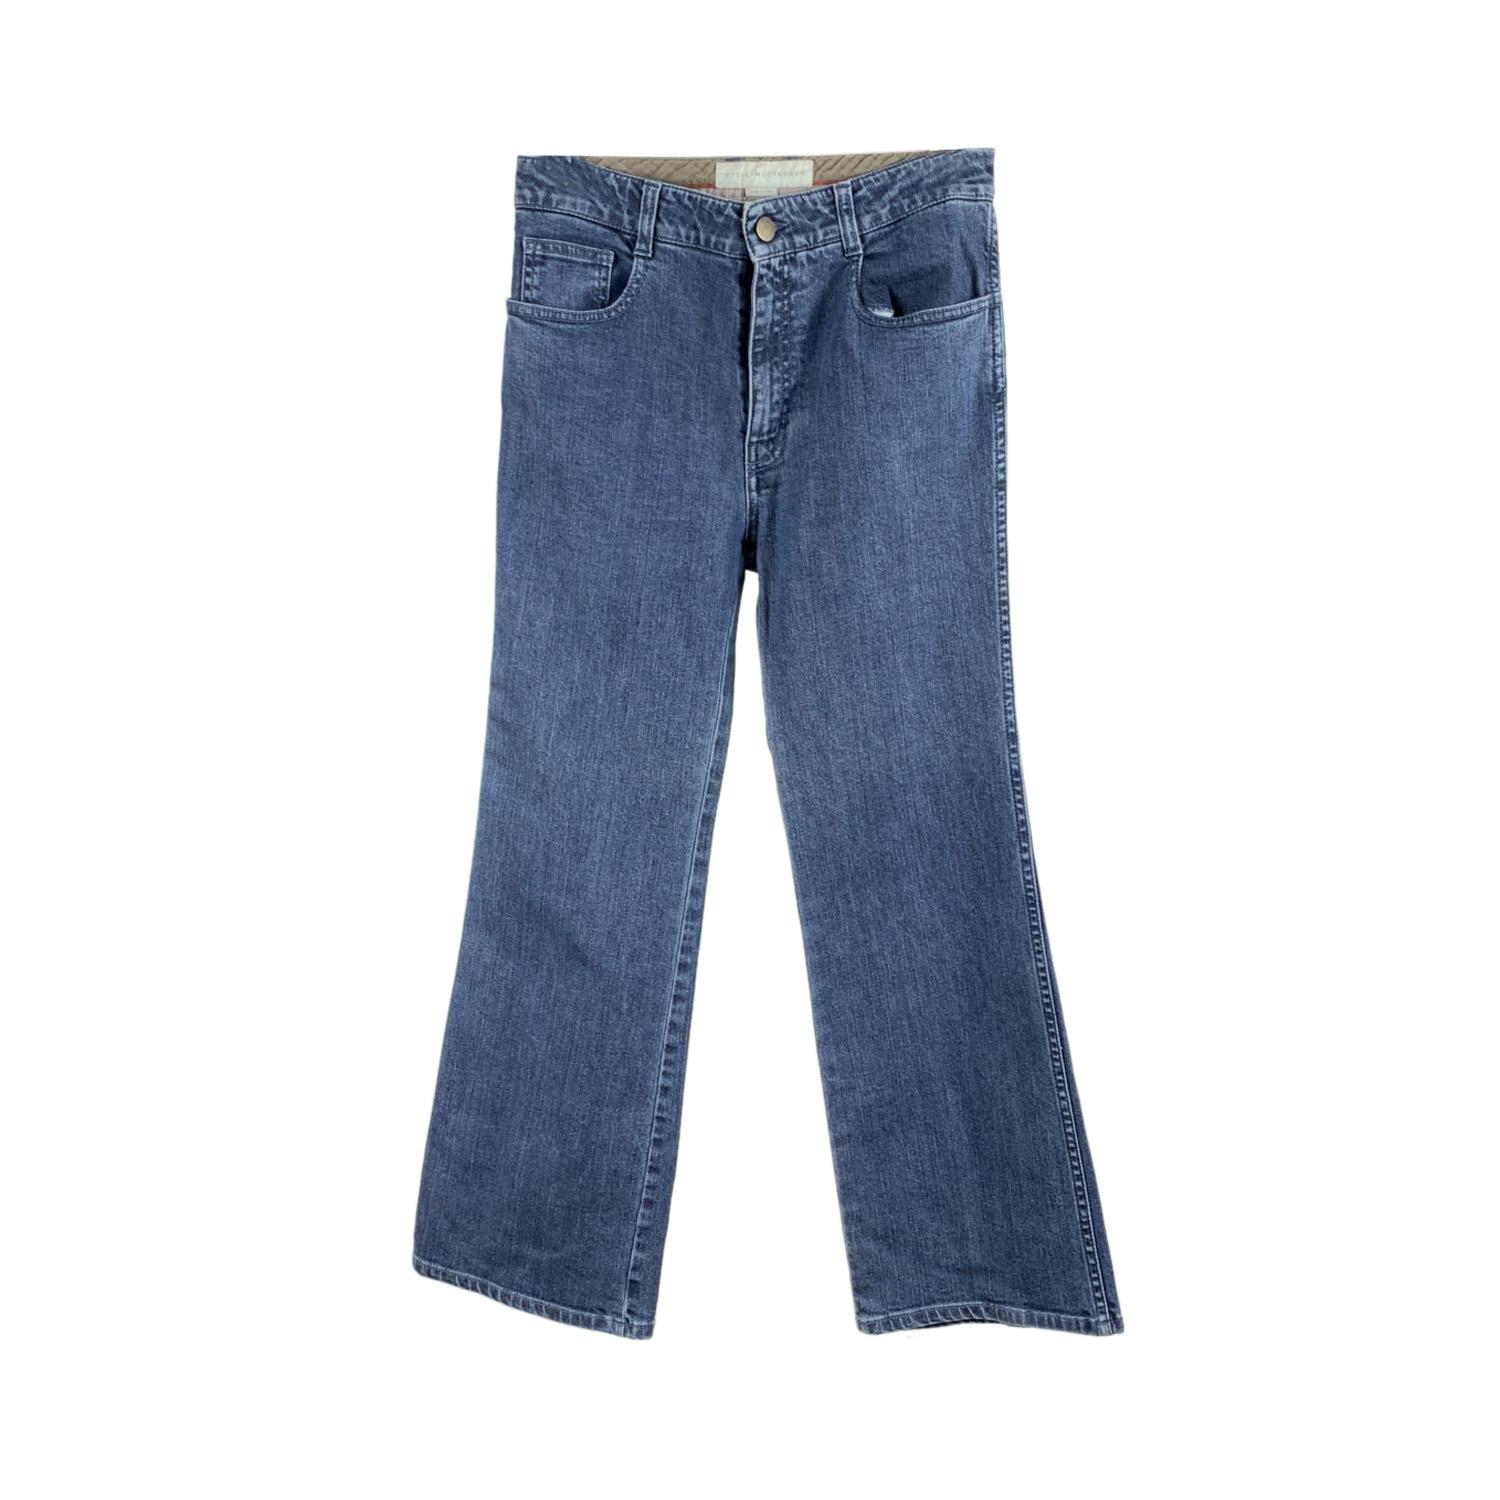 Stella McCartney light blue cotton denim 5-pockets jeans. It features belt loops and button and zip closure on the front. Composition: 98% cotton, 2% elastane. Size is not indicated. Estimated size is a EXTRA SMALL

Details

MATERIAL: Denim

COLOR: